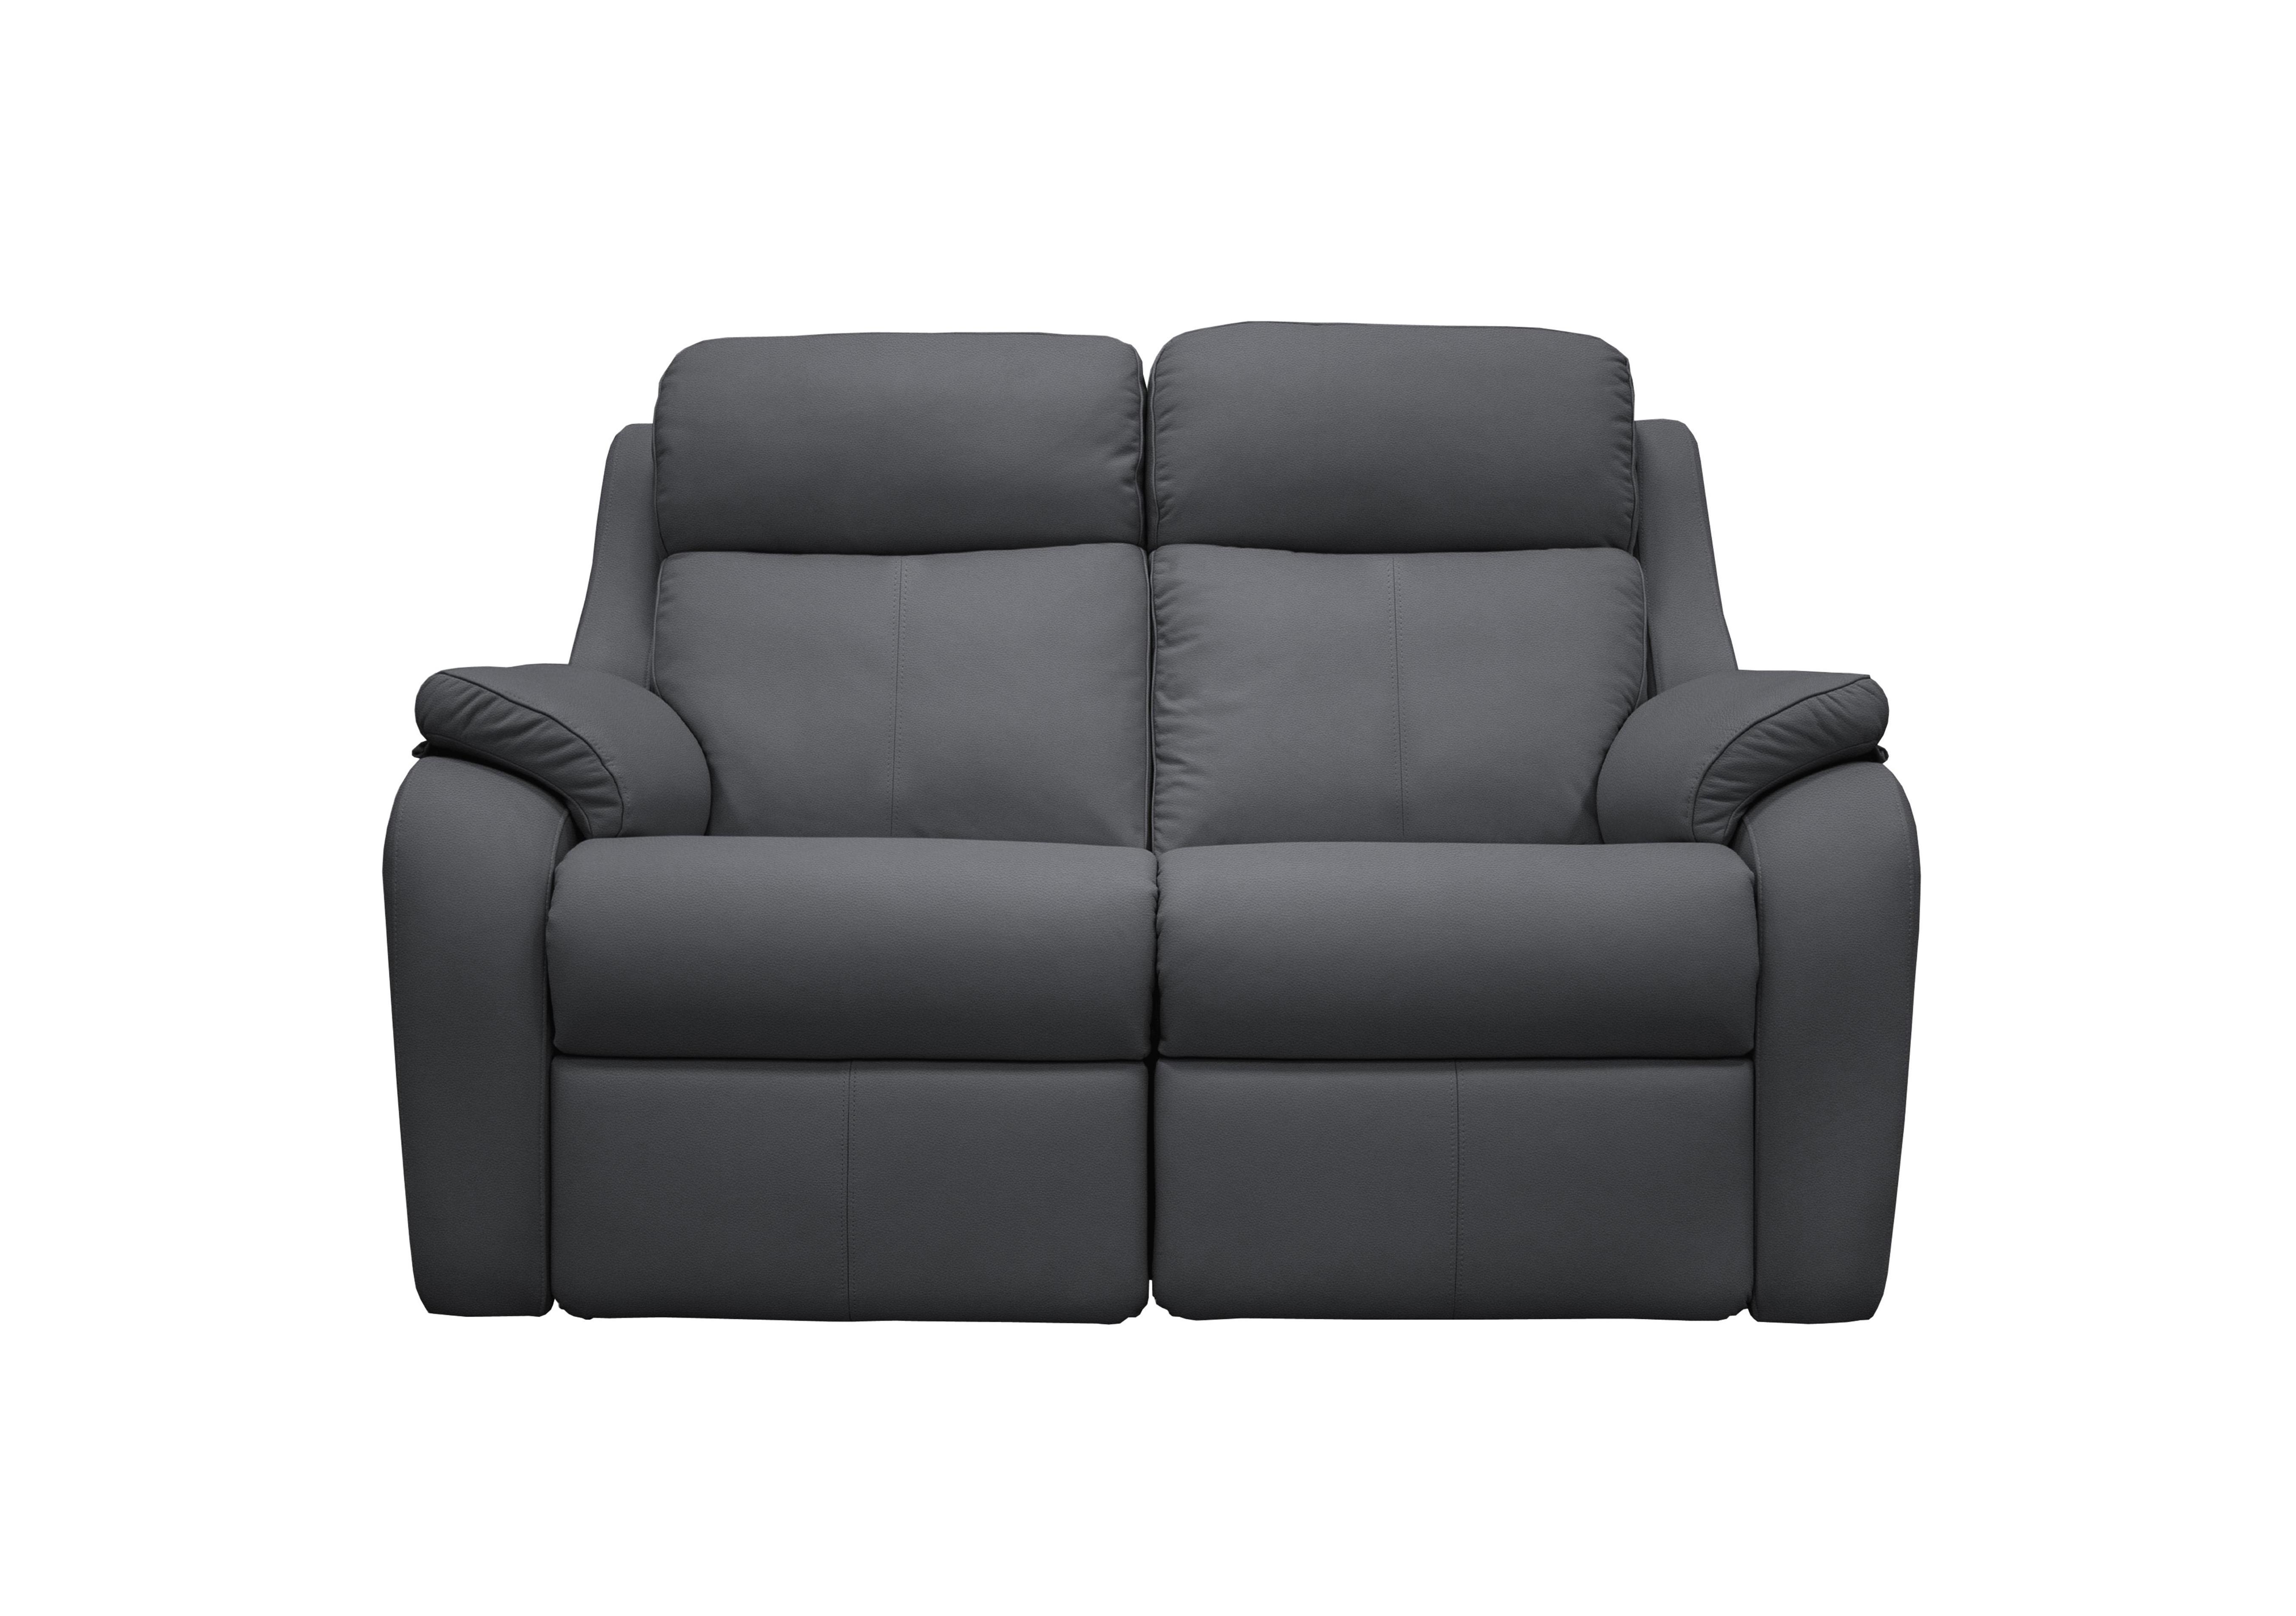 Kingsbury 2 Seater Leather Power Recliner Sofa with Power Headrests in L852 Cambridge Petrol Blue on Furniture Village